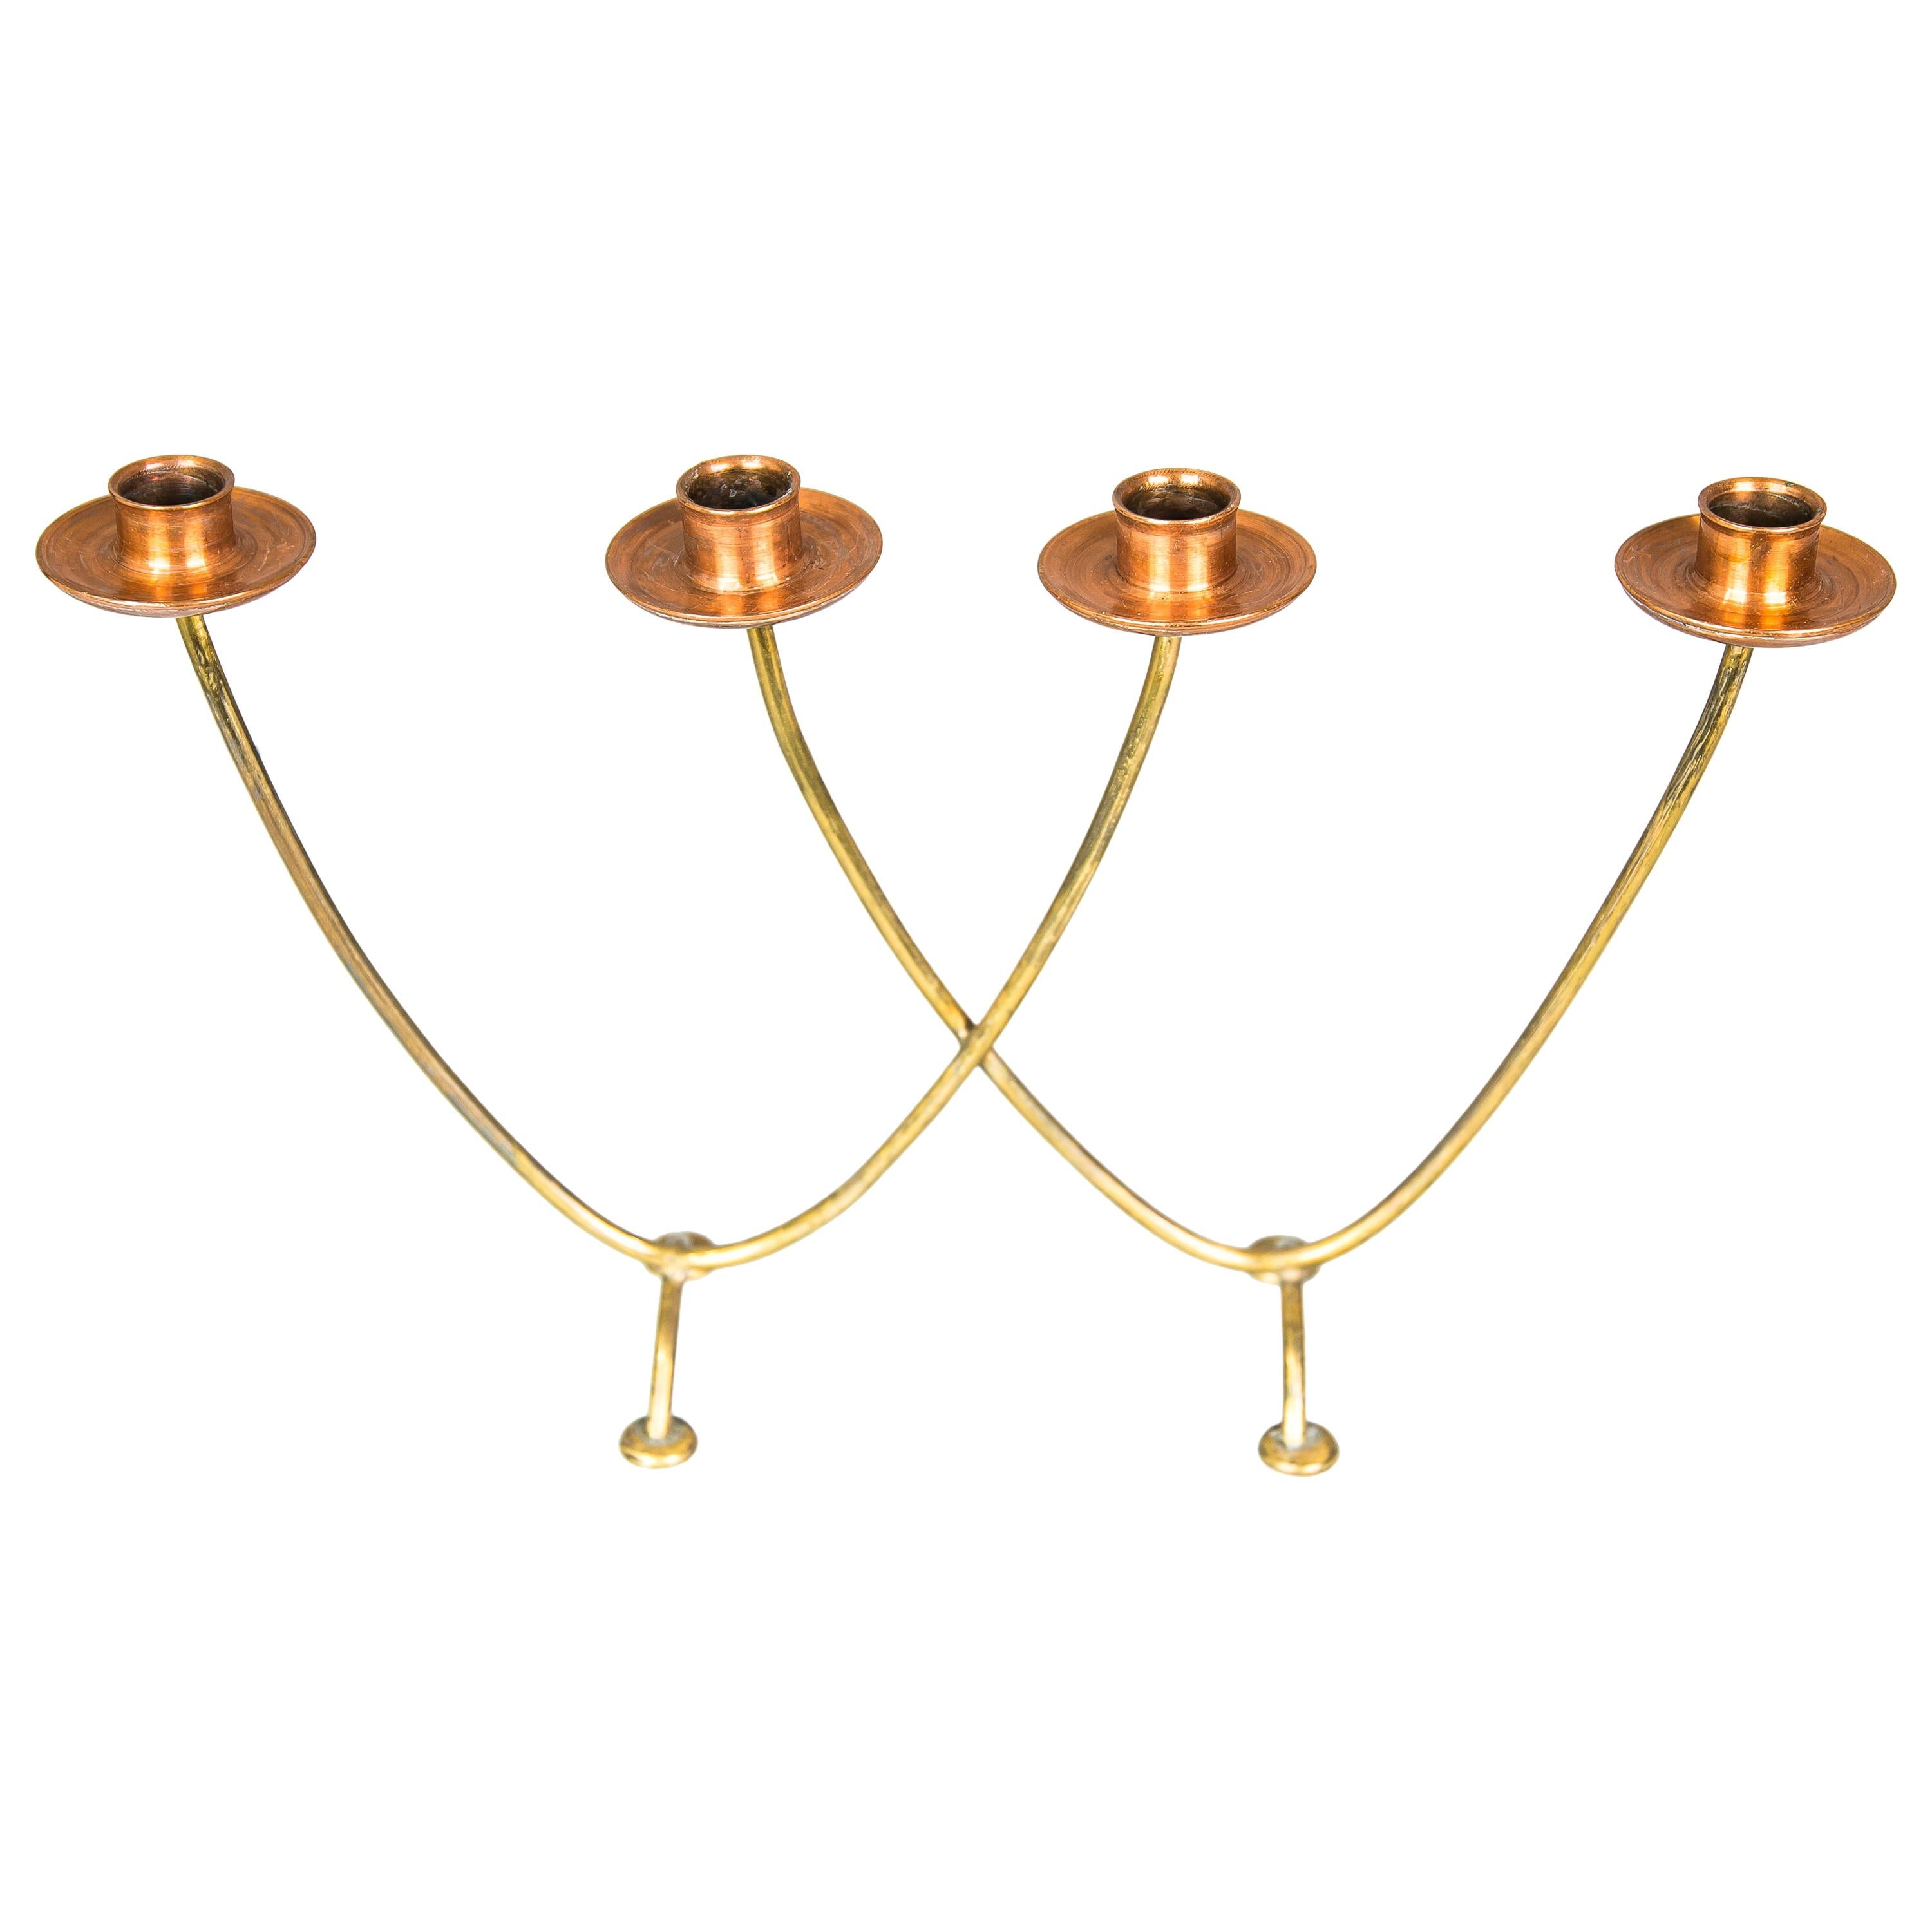 Candleholder for 4 Candles Execution in Copper and Brass, circa 1950s